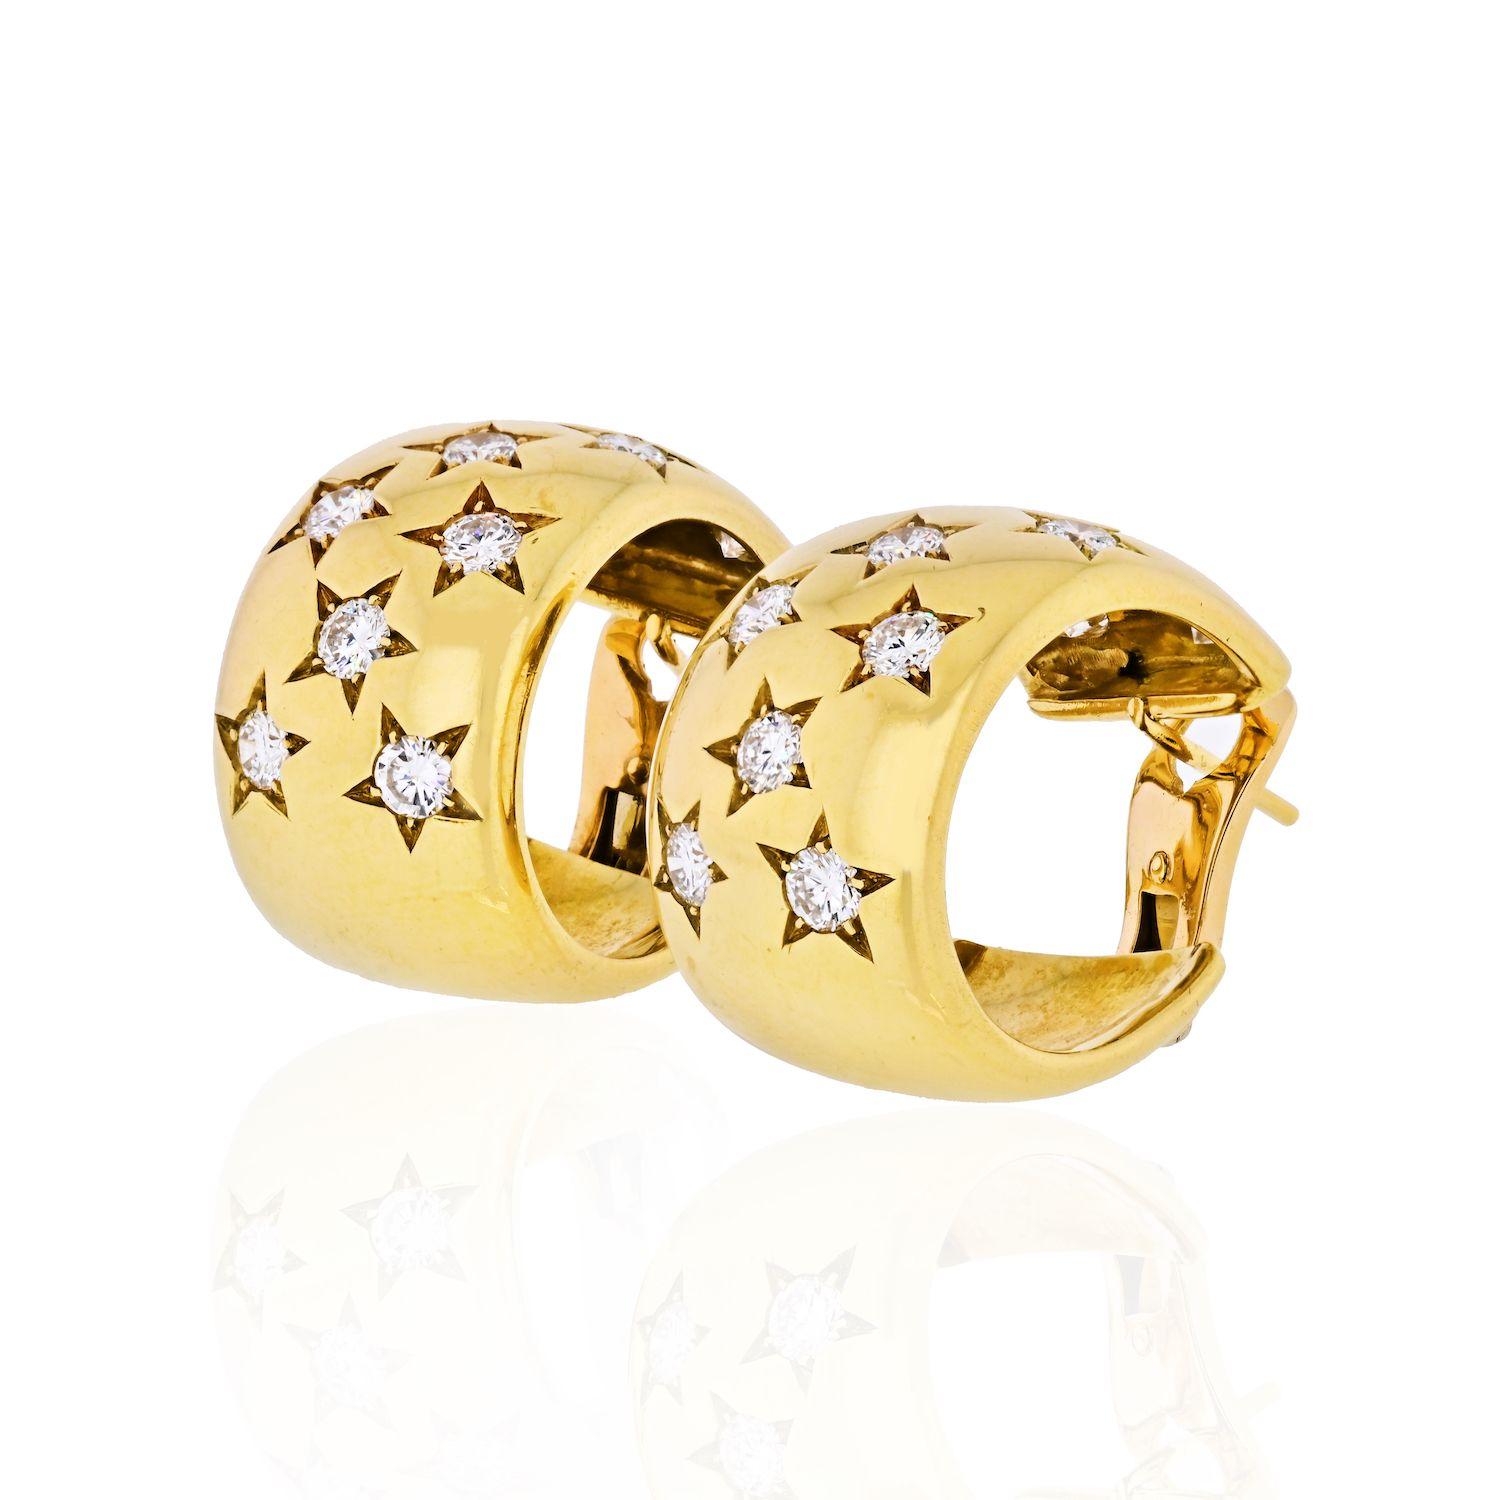 A pair of Cartier 18K yellow gold huggie style clip earrings having diamonds in star settings. The earrings are approximately 14.50 mm wide and approximately 24.00 mm in length. Circa 1970's. Diamond weight: 2.86cts. 14mm x 24mm.
